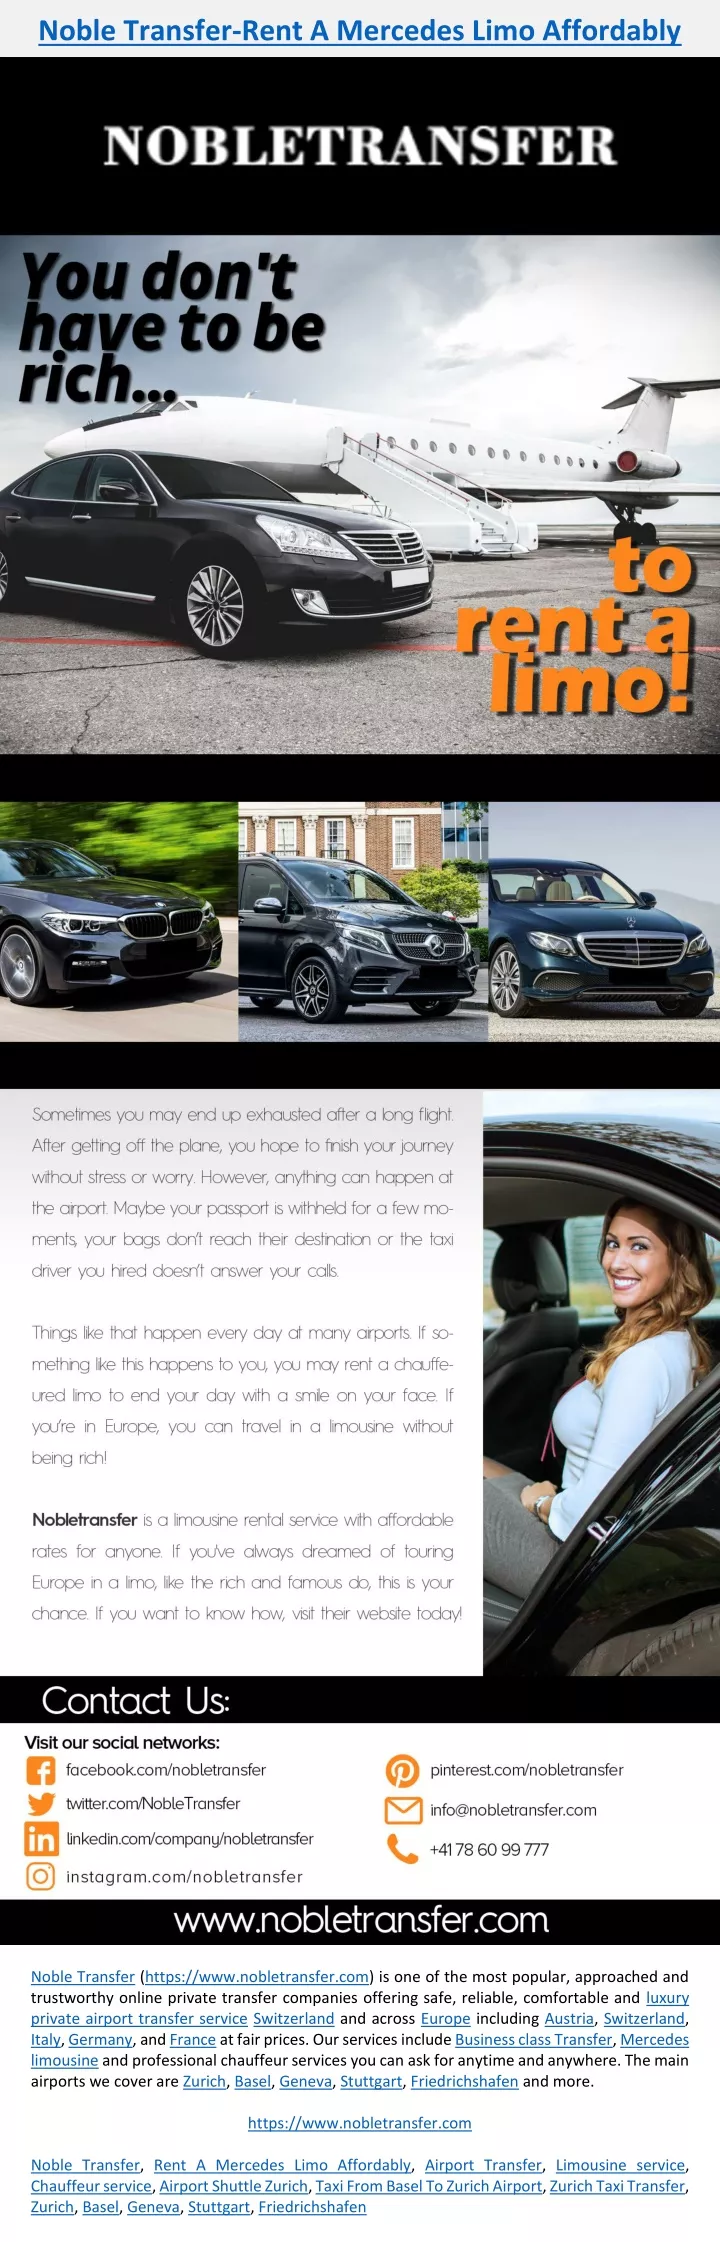 noble transfer rent a mercedes limo affordably